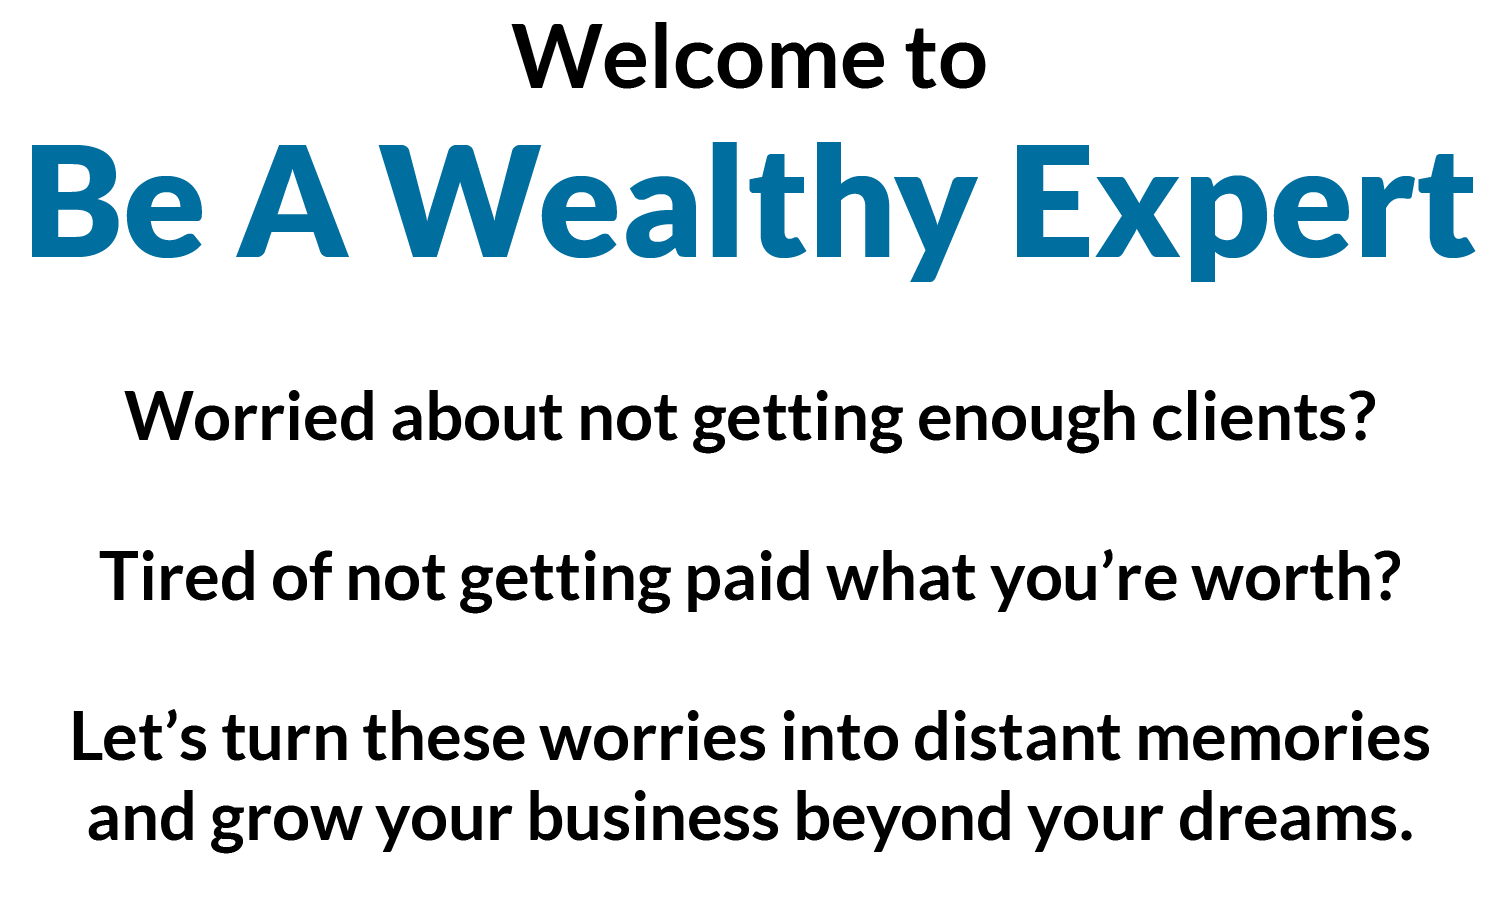 Welcome to Be A Wealthy Expert - Worried abou not getting enough clients? - Tired of not gettinh paid what you're worth? - Let's turn these worries into distant memories and grow your business beyond your dreams.